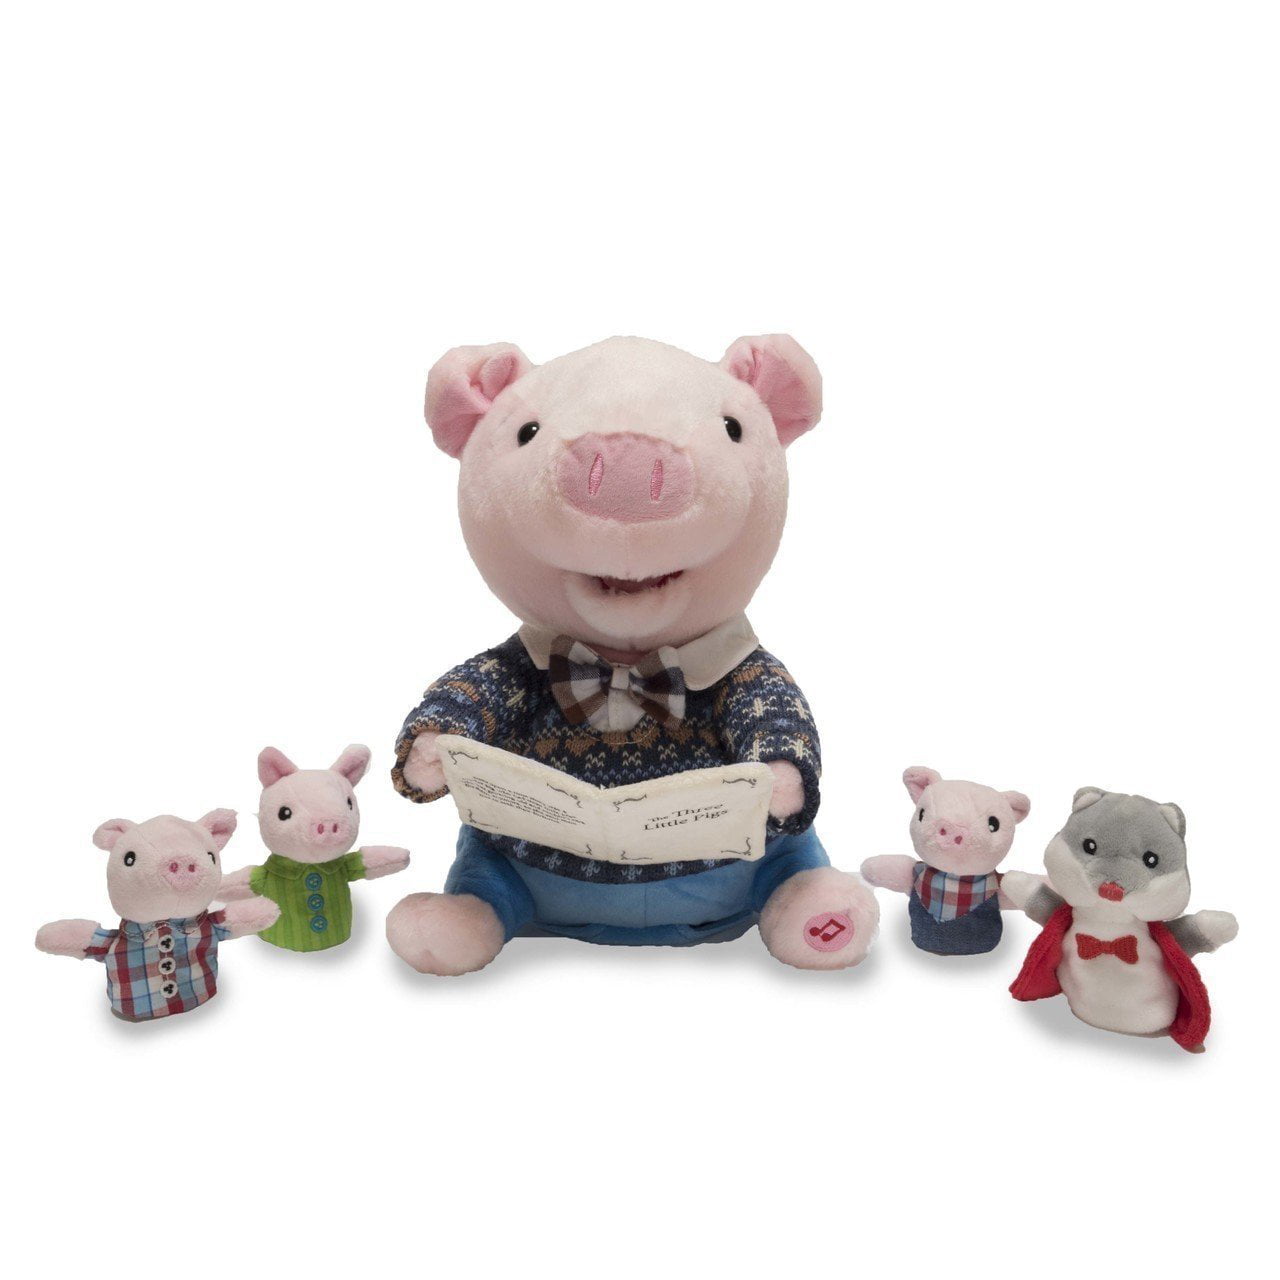 Cuddle Barn Preston the Storytelling Pig Animated Talking Plush Toy, 12  Super Soft Cuddly Stuffed Animal Captivates Listeners with Classic Story  Three Little Pigs, Includes 4 Finger Puppets 